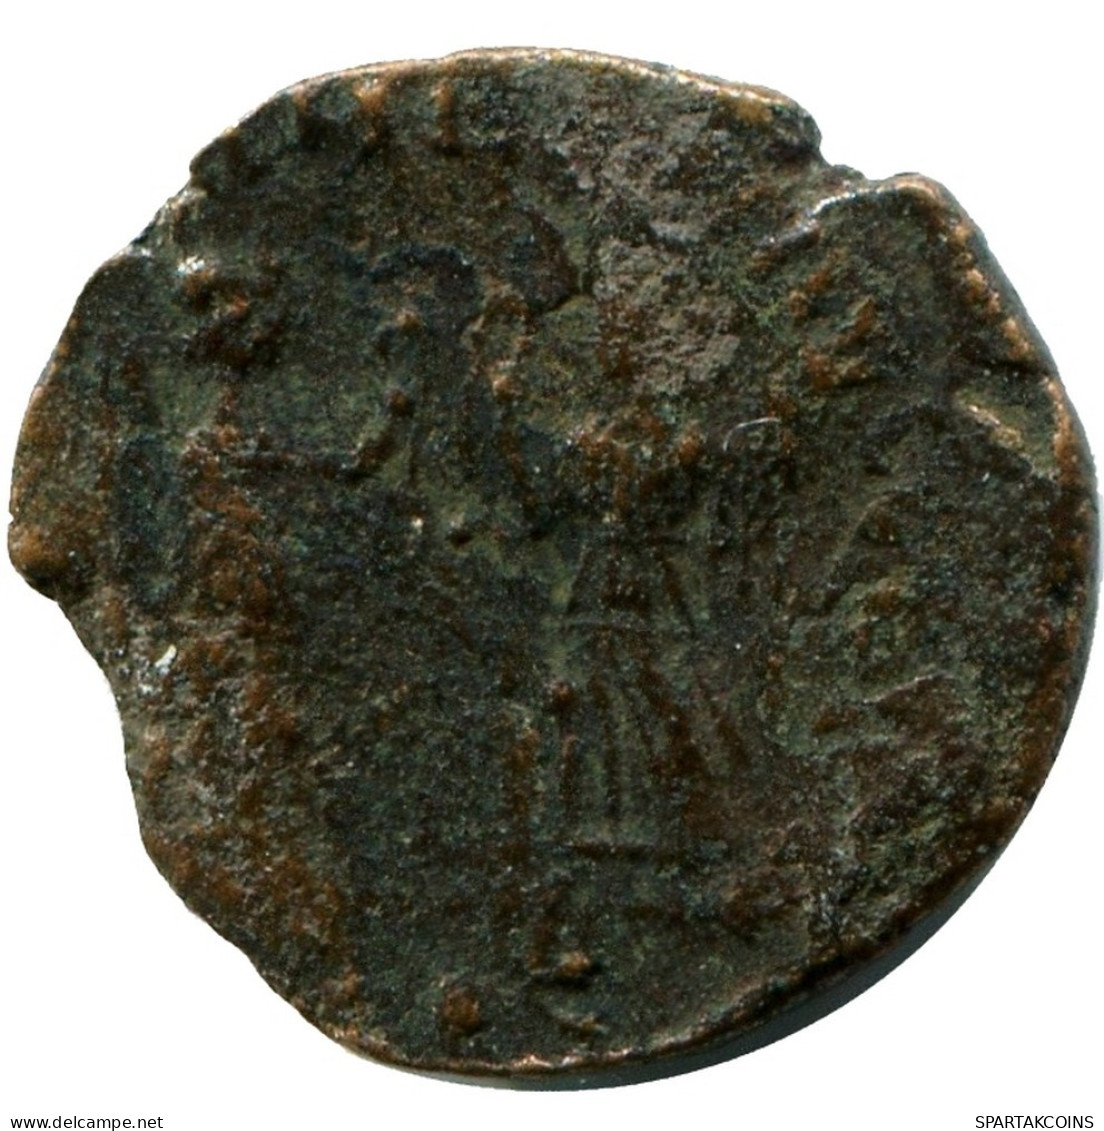 CONSTANS MINTED IN ROME ITALY FROM THE ROYAL ONTARIO MUSEUM #ANC11498.14.E.A - The Christian Empire (307 AD To 363 AD)